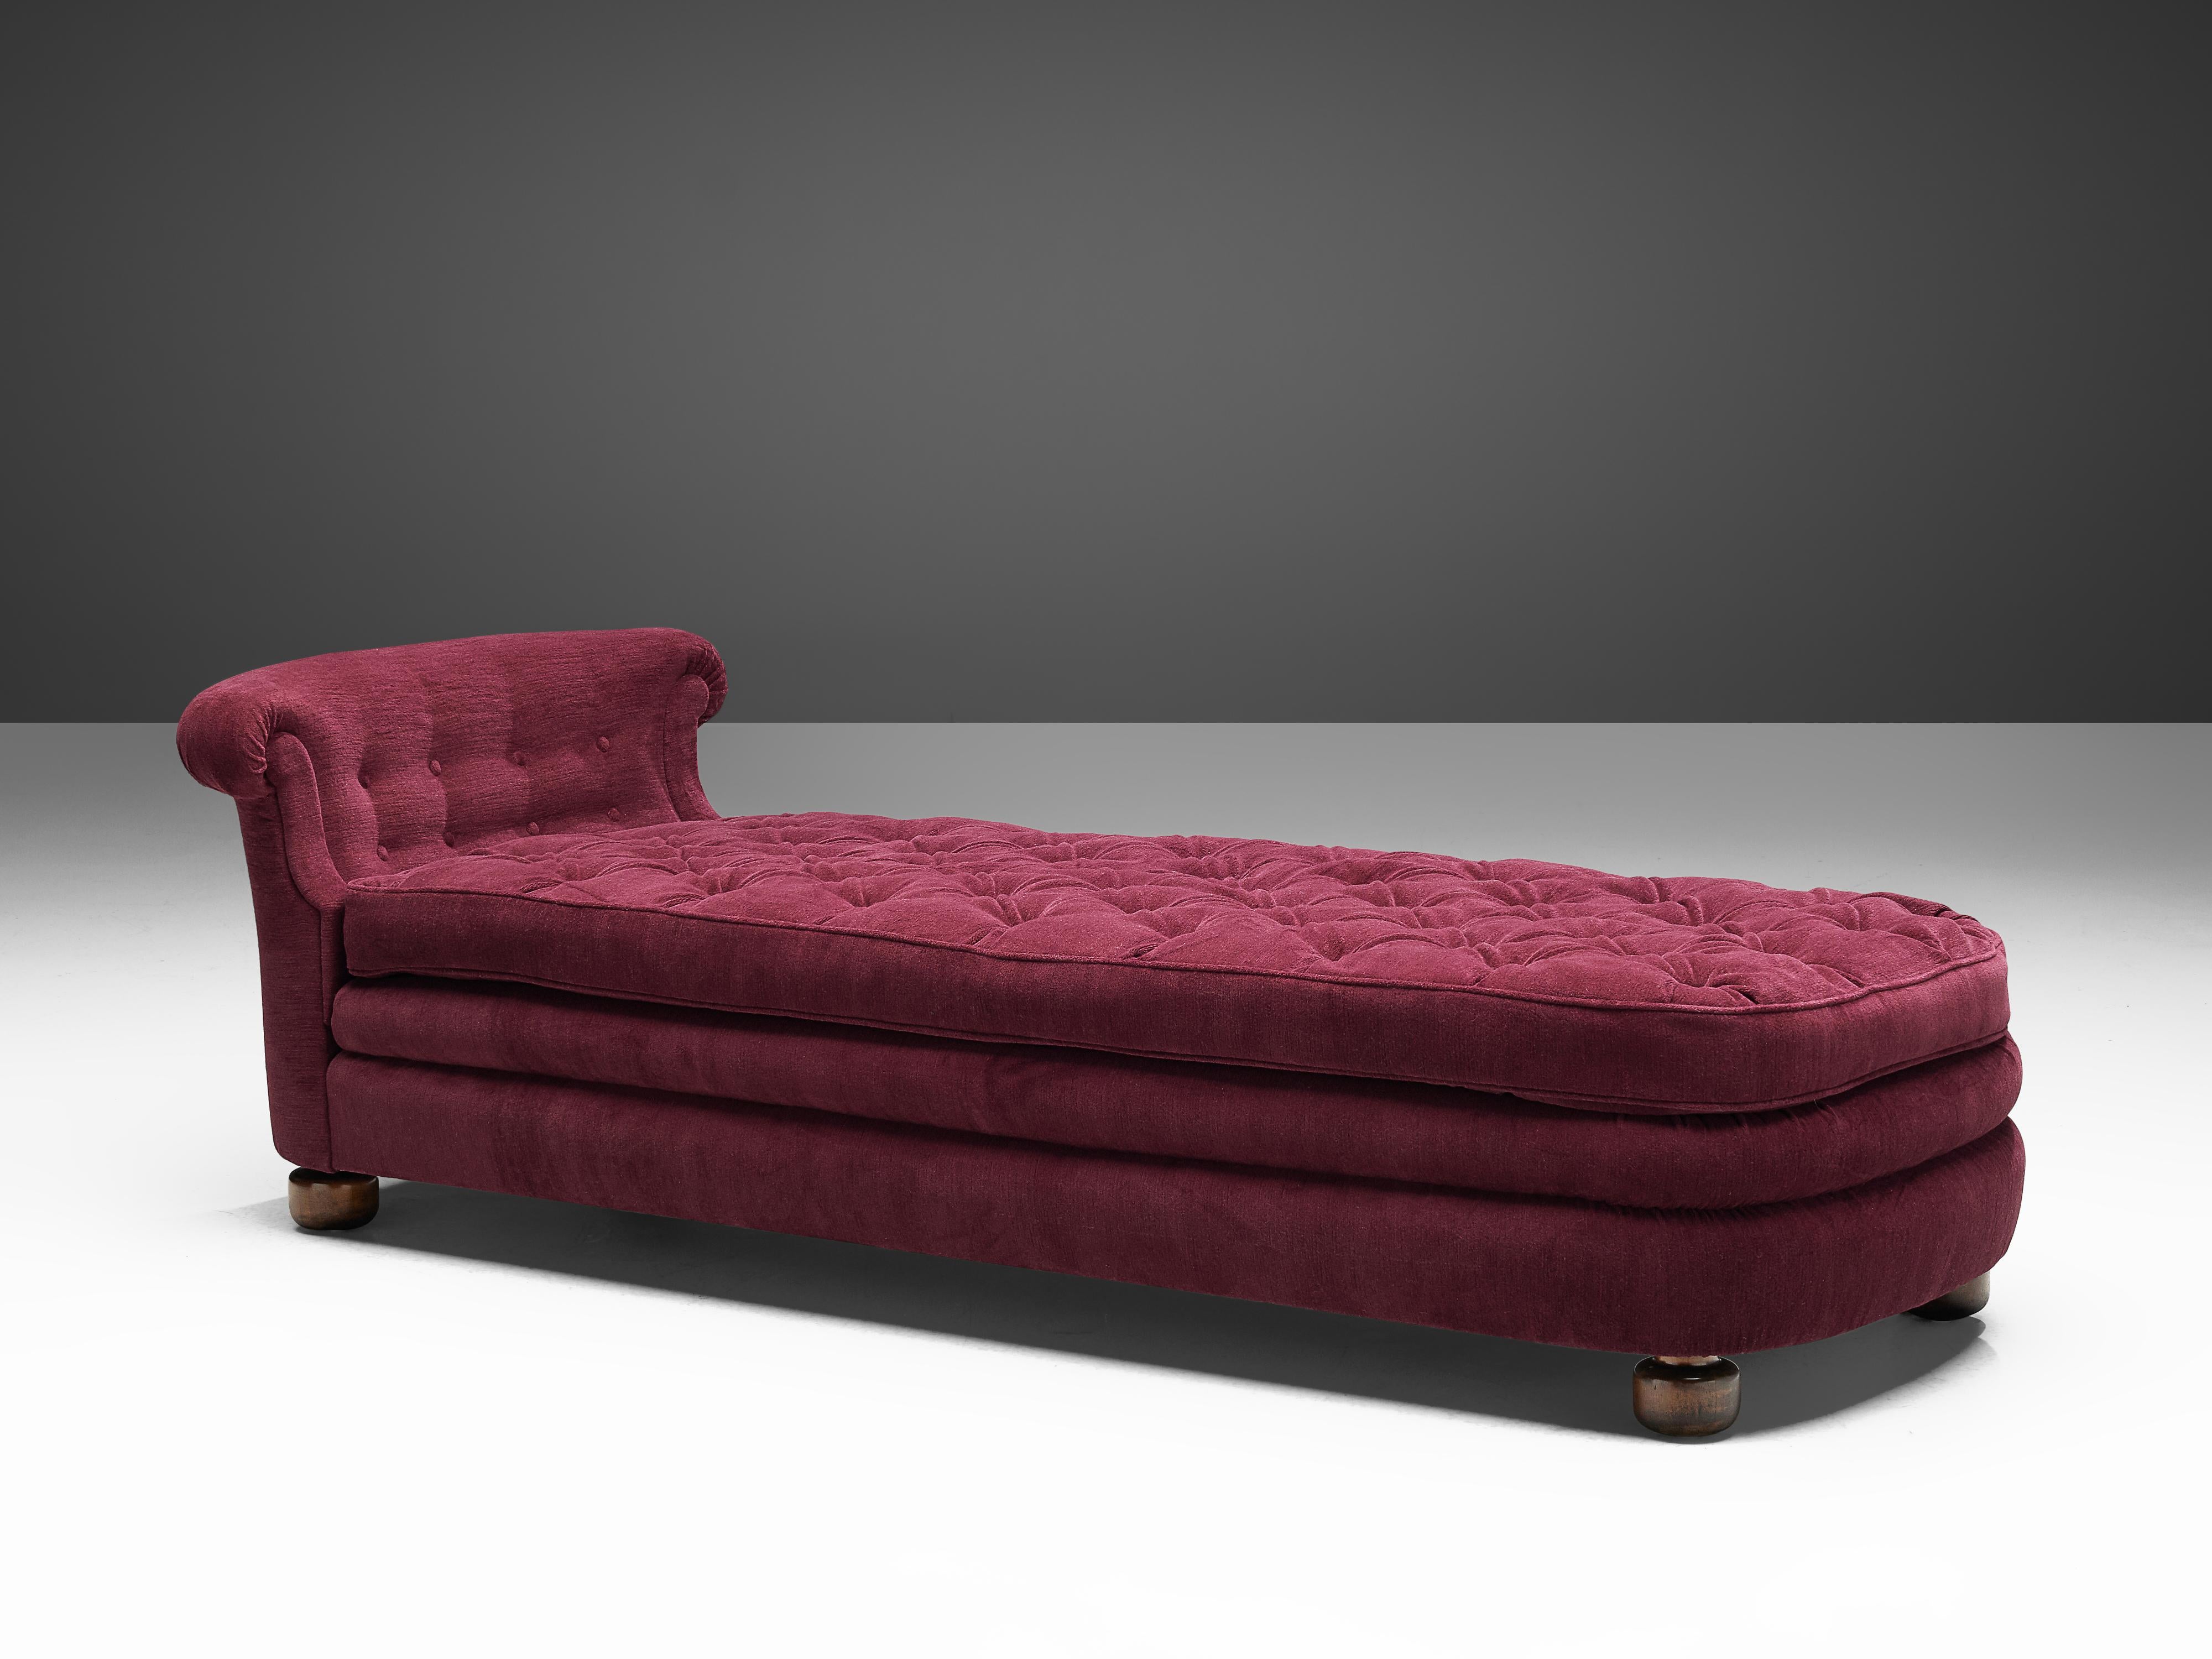 Josef Frank, daybed '775', fabric, wood, Sweden, 1938.

Completely restored and reupholstered chaise lounge designed by Josef Frank in 1938. The piece has been reupholstered in a burgundy, high quality fabric. The tufted seat and backrest give